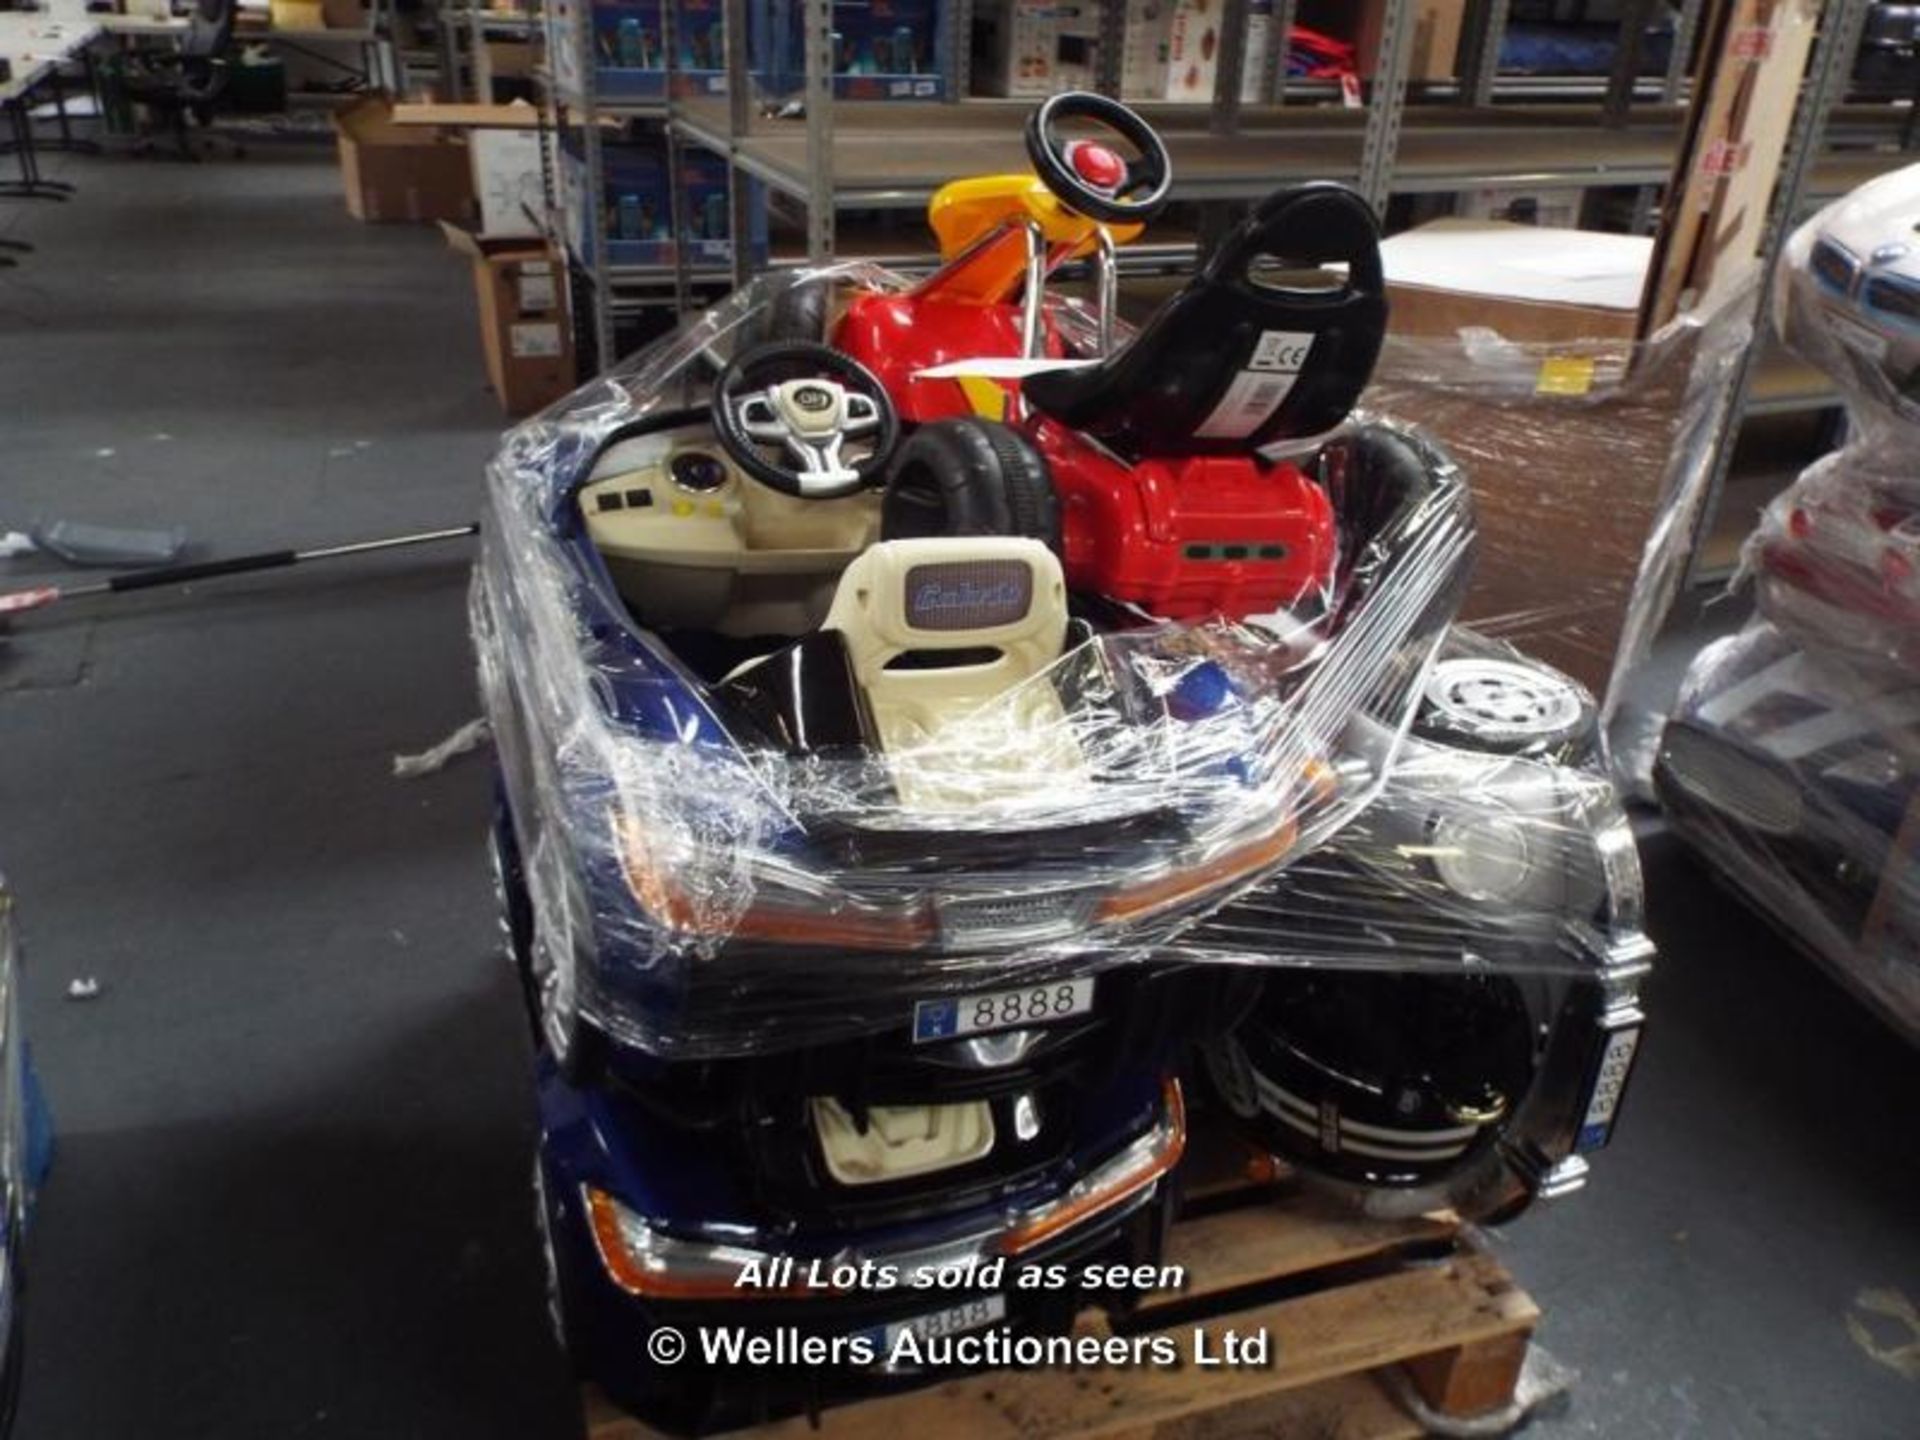 MIXED PALLET OF 5X KIDS RIDE-ON ELECTRONIC TOYS INCLUDING ASTON MARTIN, GO KART, VW BEETLE /